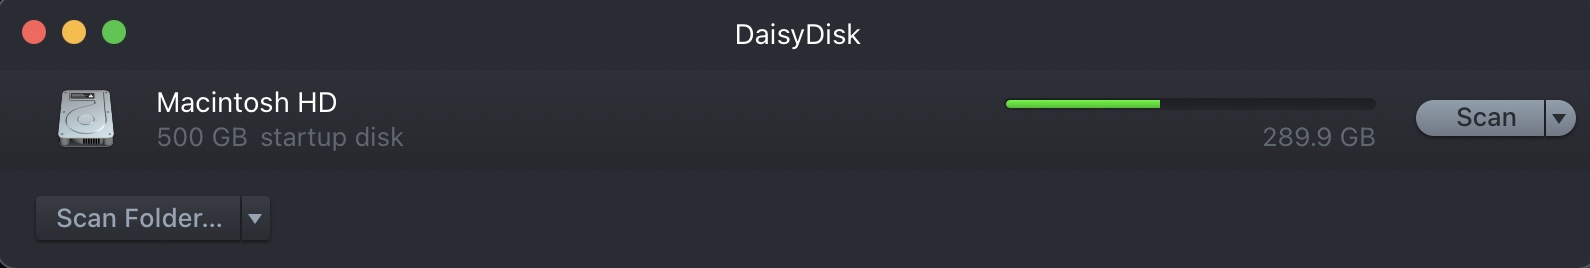 storage selection screen in daisy disk